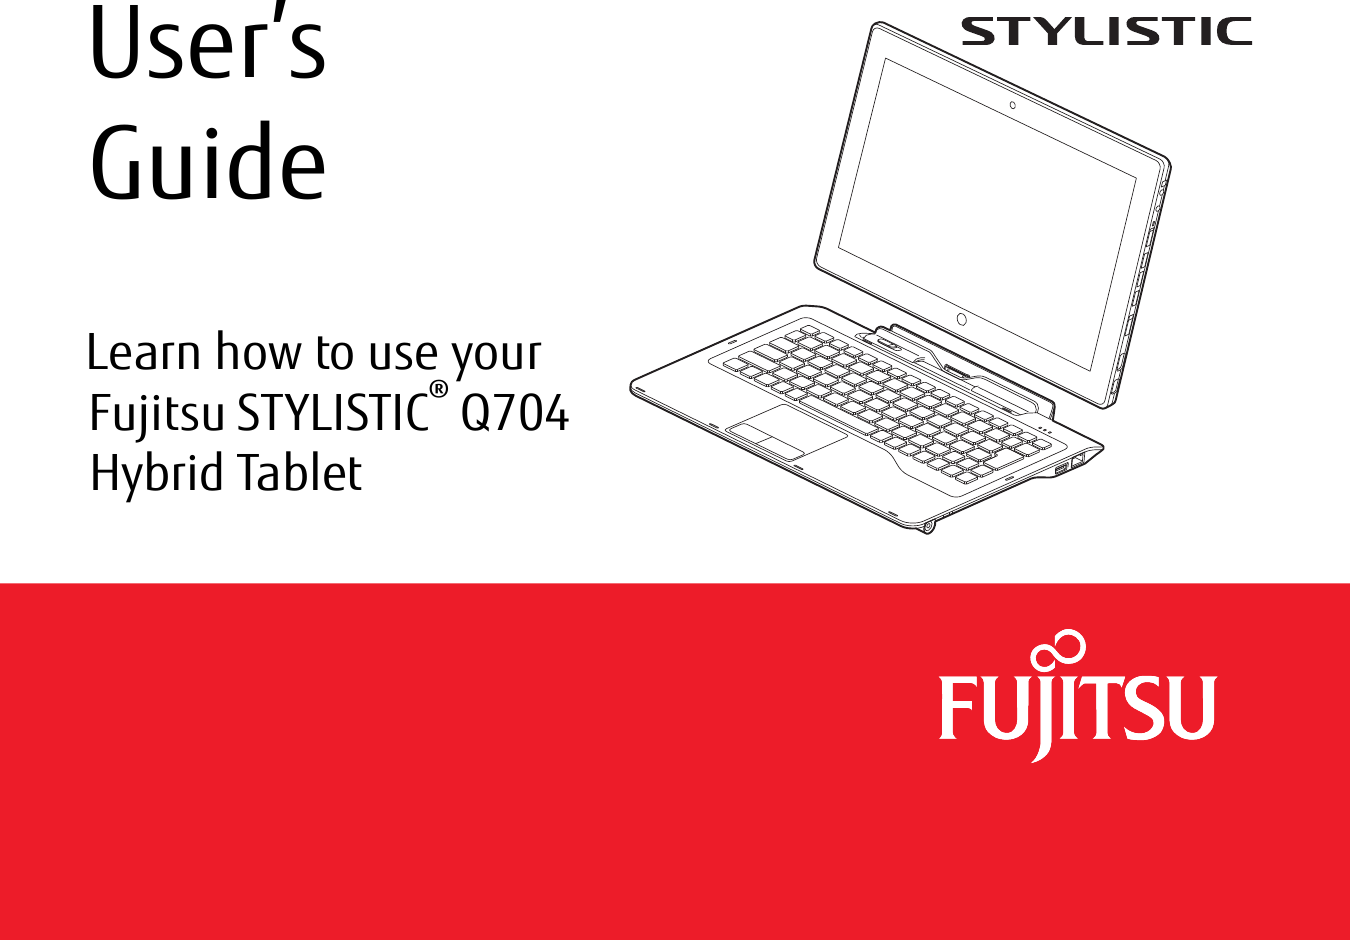  User’s GuideLearn how to use your Fujitsu STYLISTIC® Q704 Hybrid Tablet